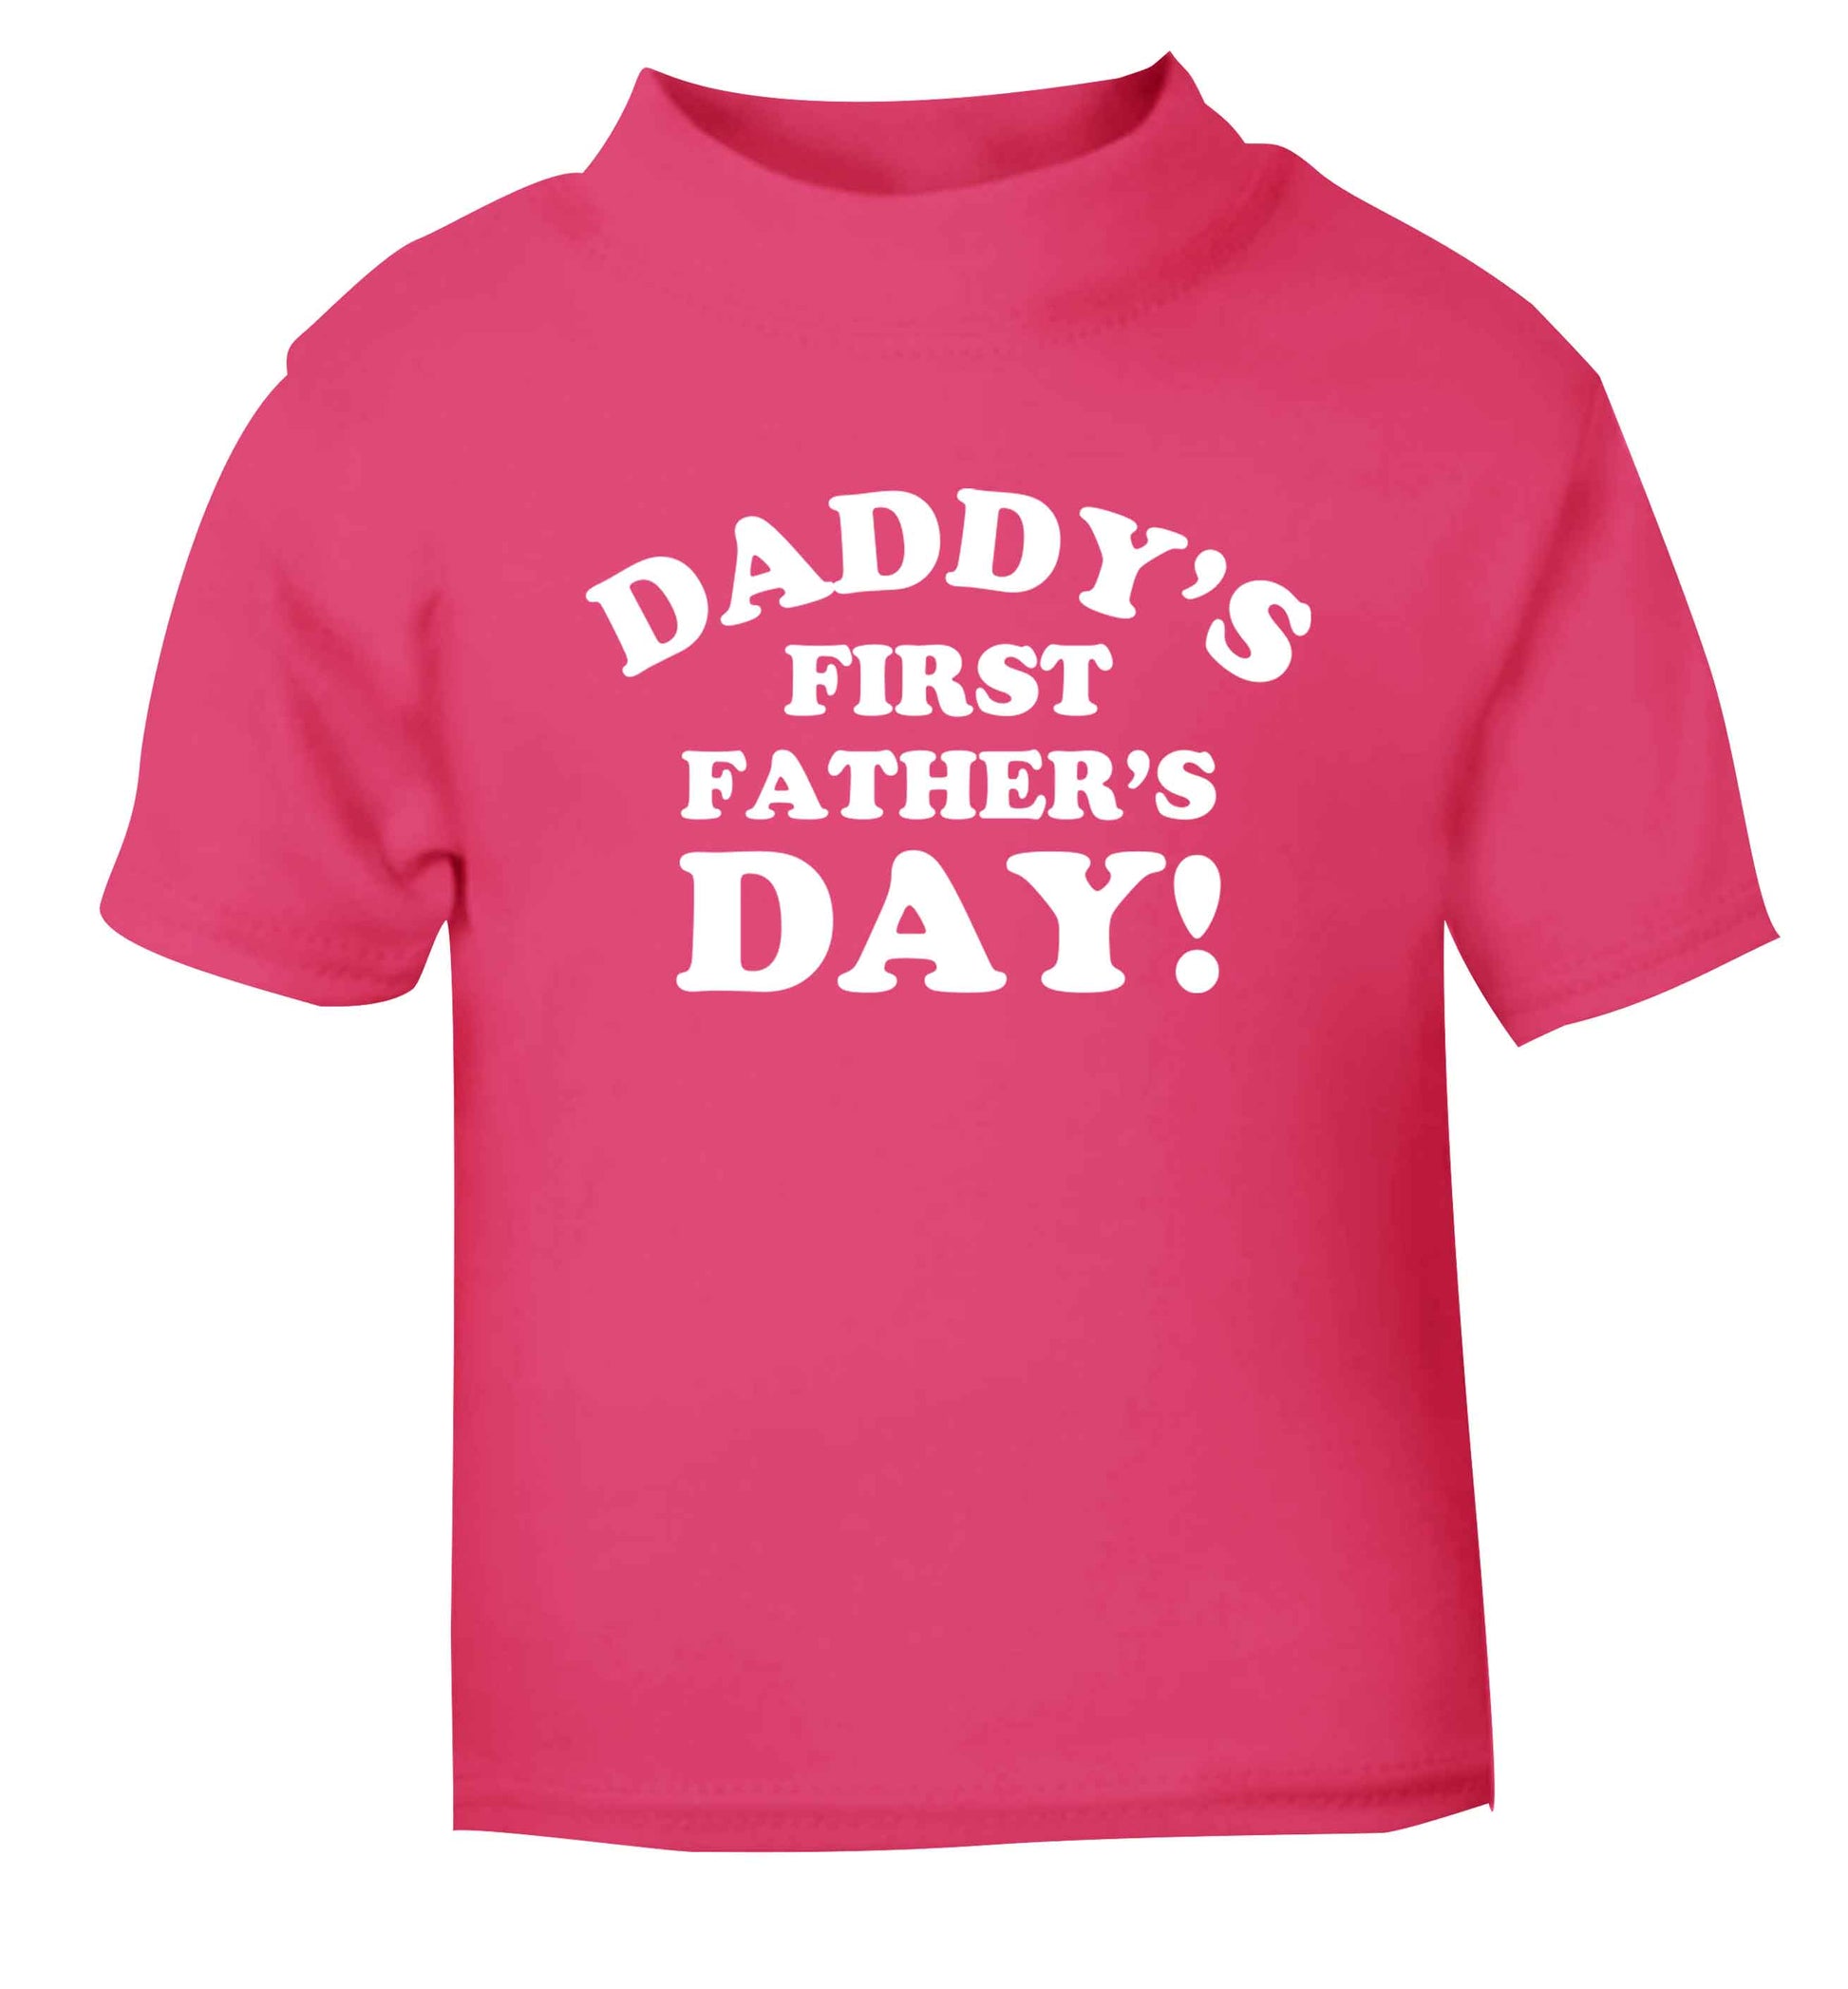 Daddy's first father's day pink baby toddler Tshirt 2 Years